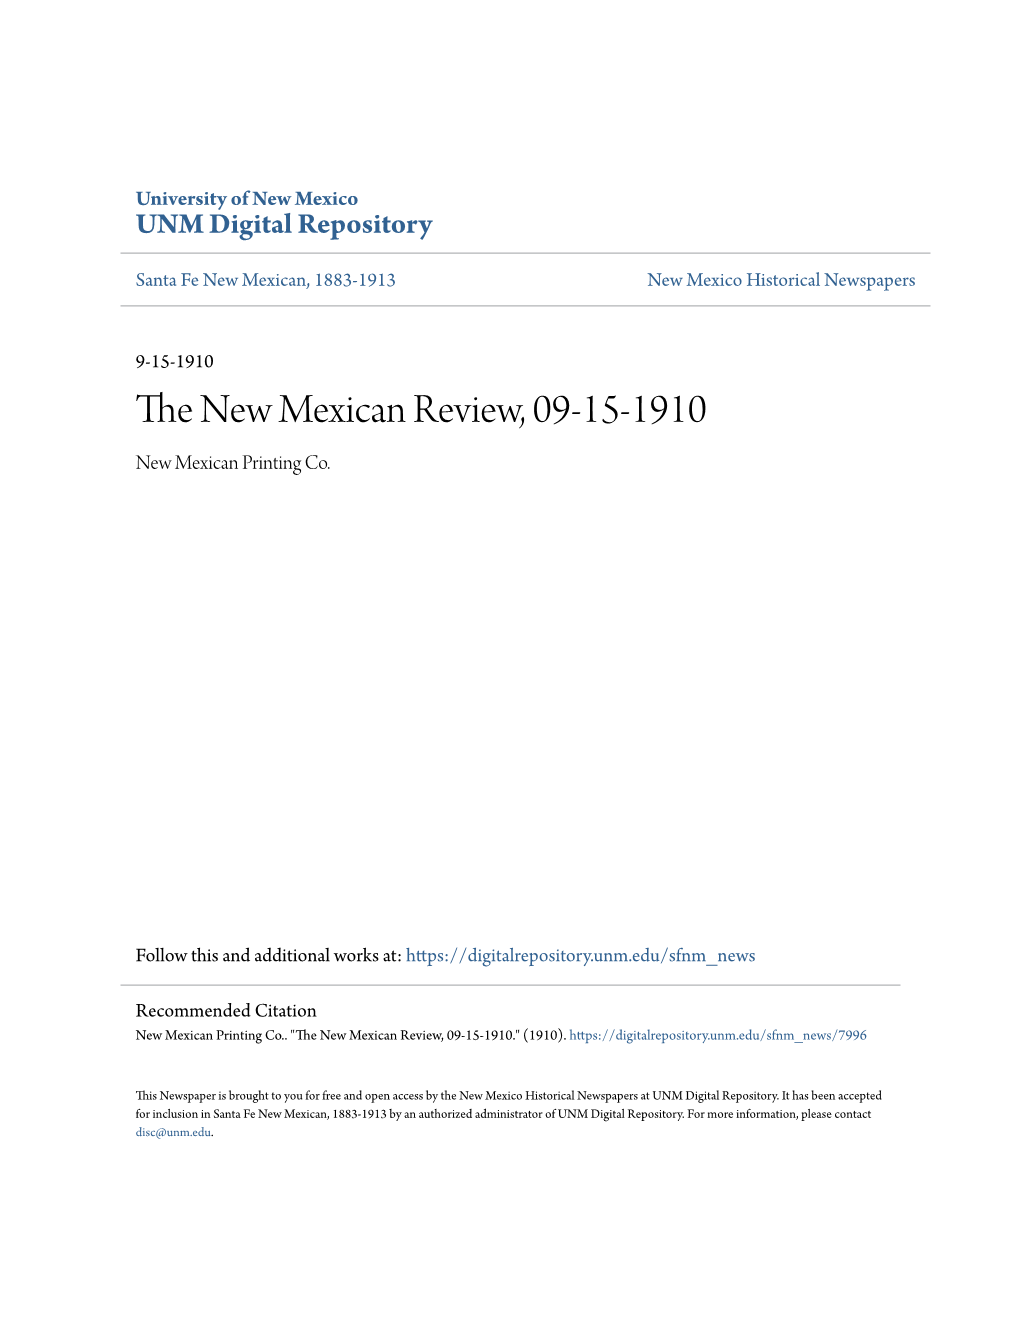 The New Mexican Review, 09-15-1910